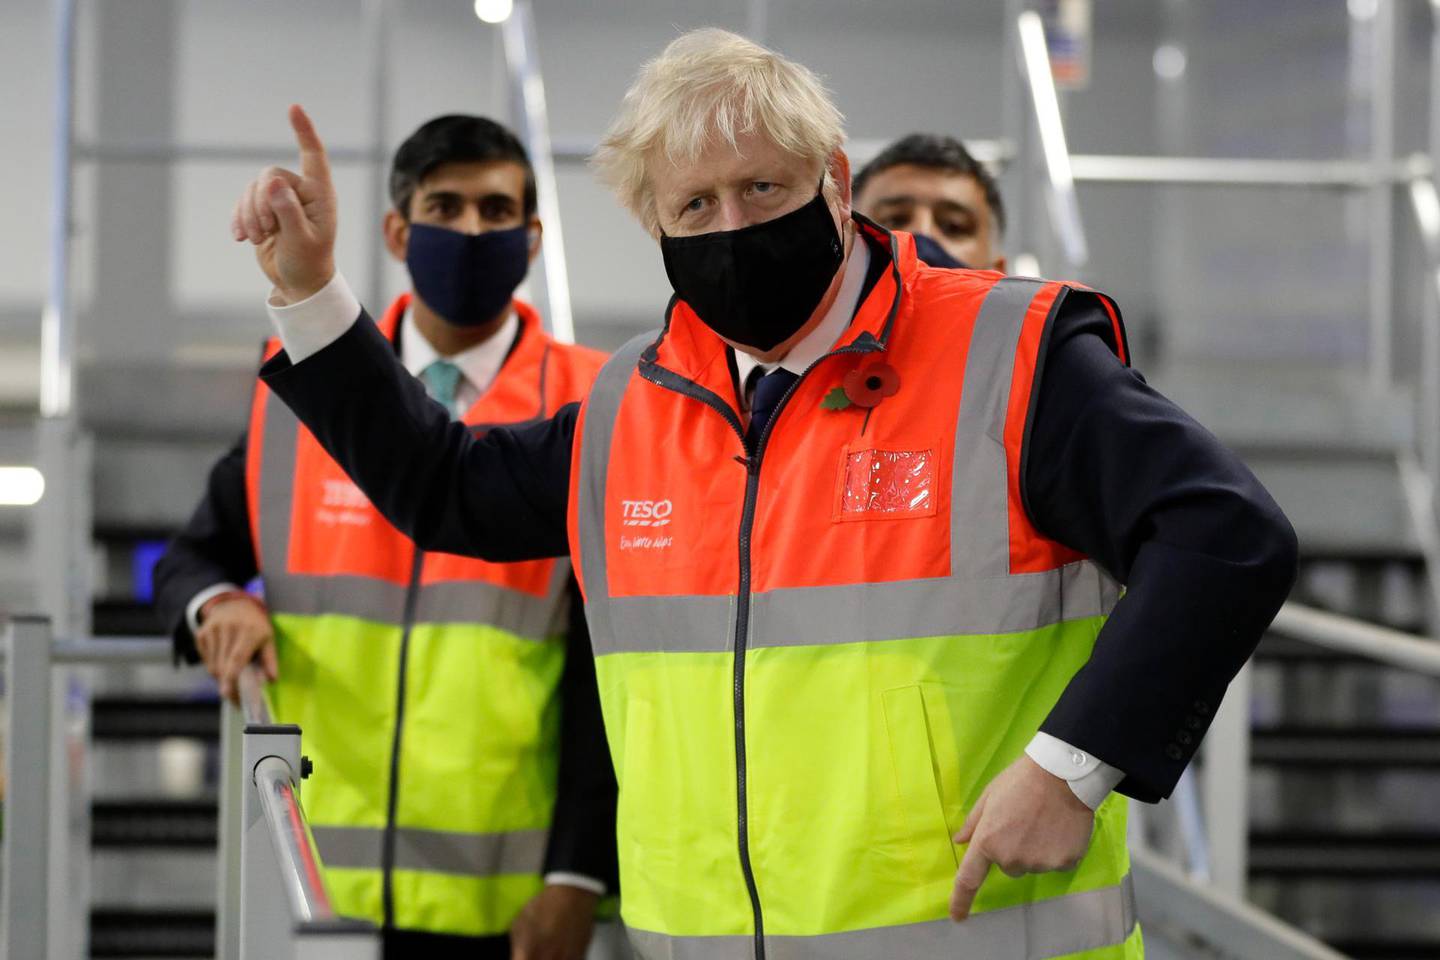 FILE - In this Nov. 11, 2020 file photo Britain's Prime Minister Boris Johnson, and Chancellor Rishi Sunak during a visit to a tesco.com distribution centre in London. Johnson is self-isolating after being told he came into contact with someone who tested positive for the coronavirus, officials said Sunday Nov. 15. "He will carry on working from Downing Street, including on leading the government's response to the coronavirus pandemic," a statement from his office said. (AP Photo/Kirsty Wigglesworth, File)